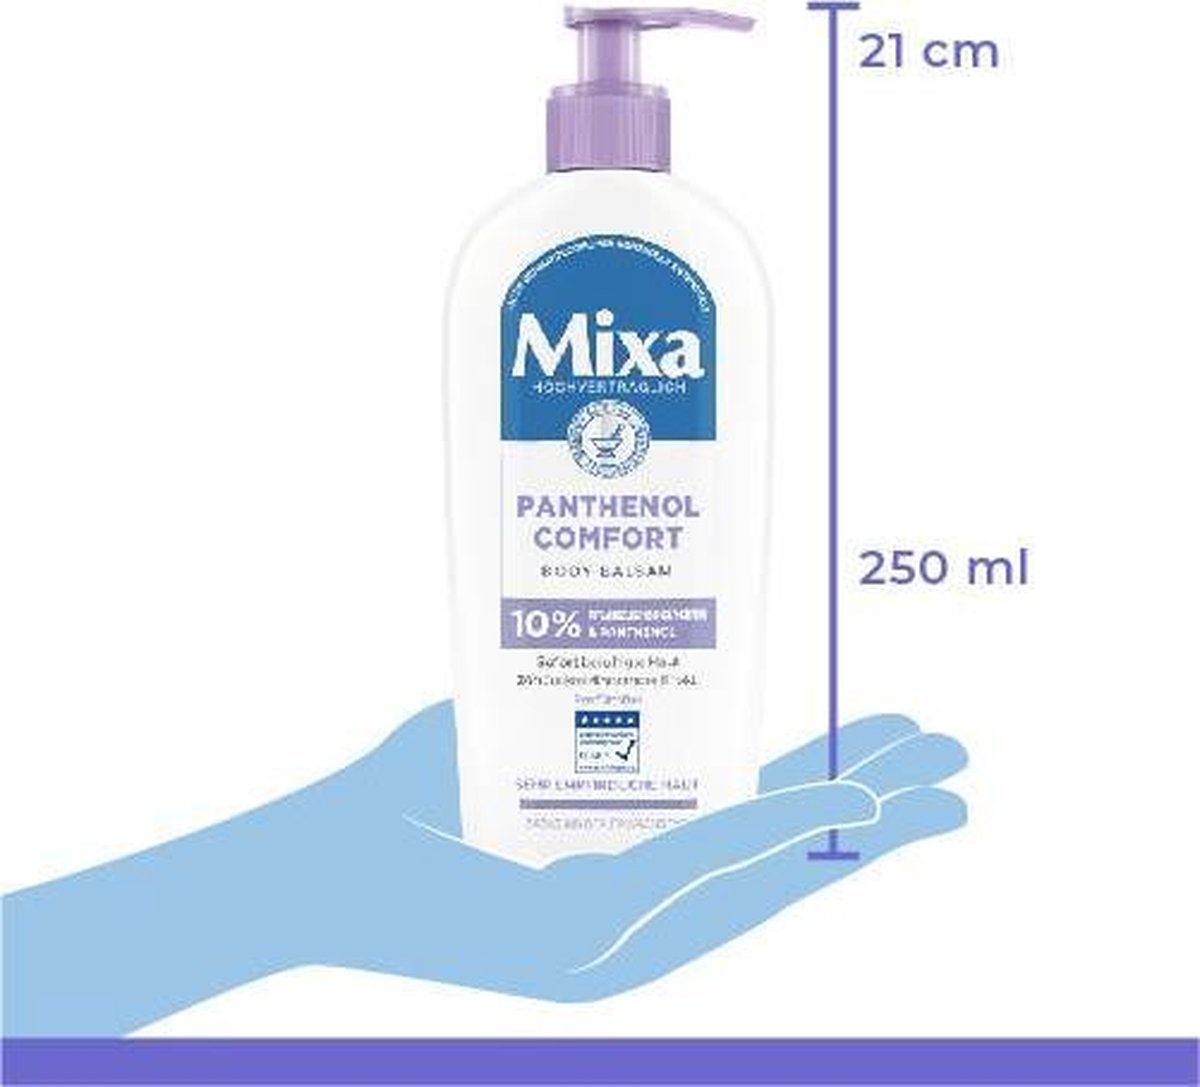 Mixa Panthenol Comfort Body Balm Itch Relief and Soothing Balm with  Panthenol and Vegetable Glycerine for Sensitive Skin 250ml